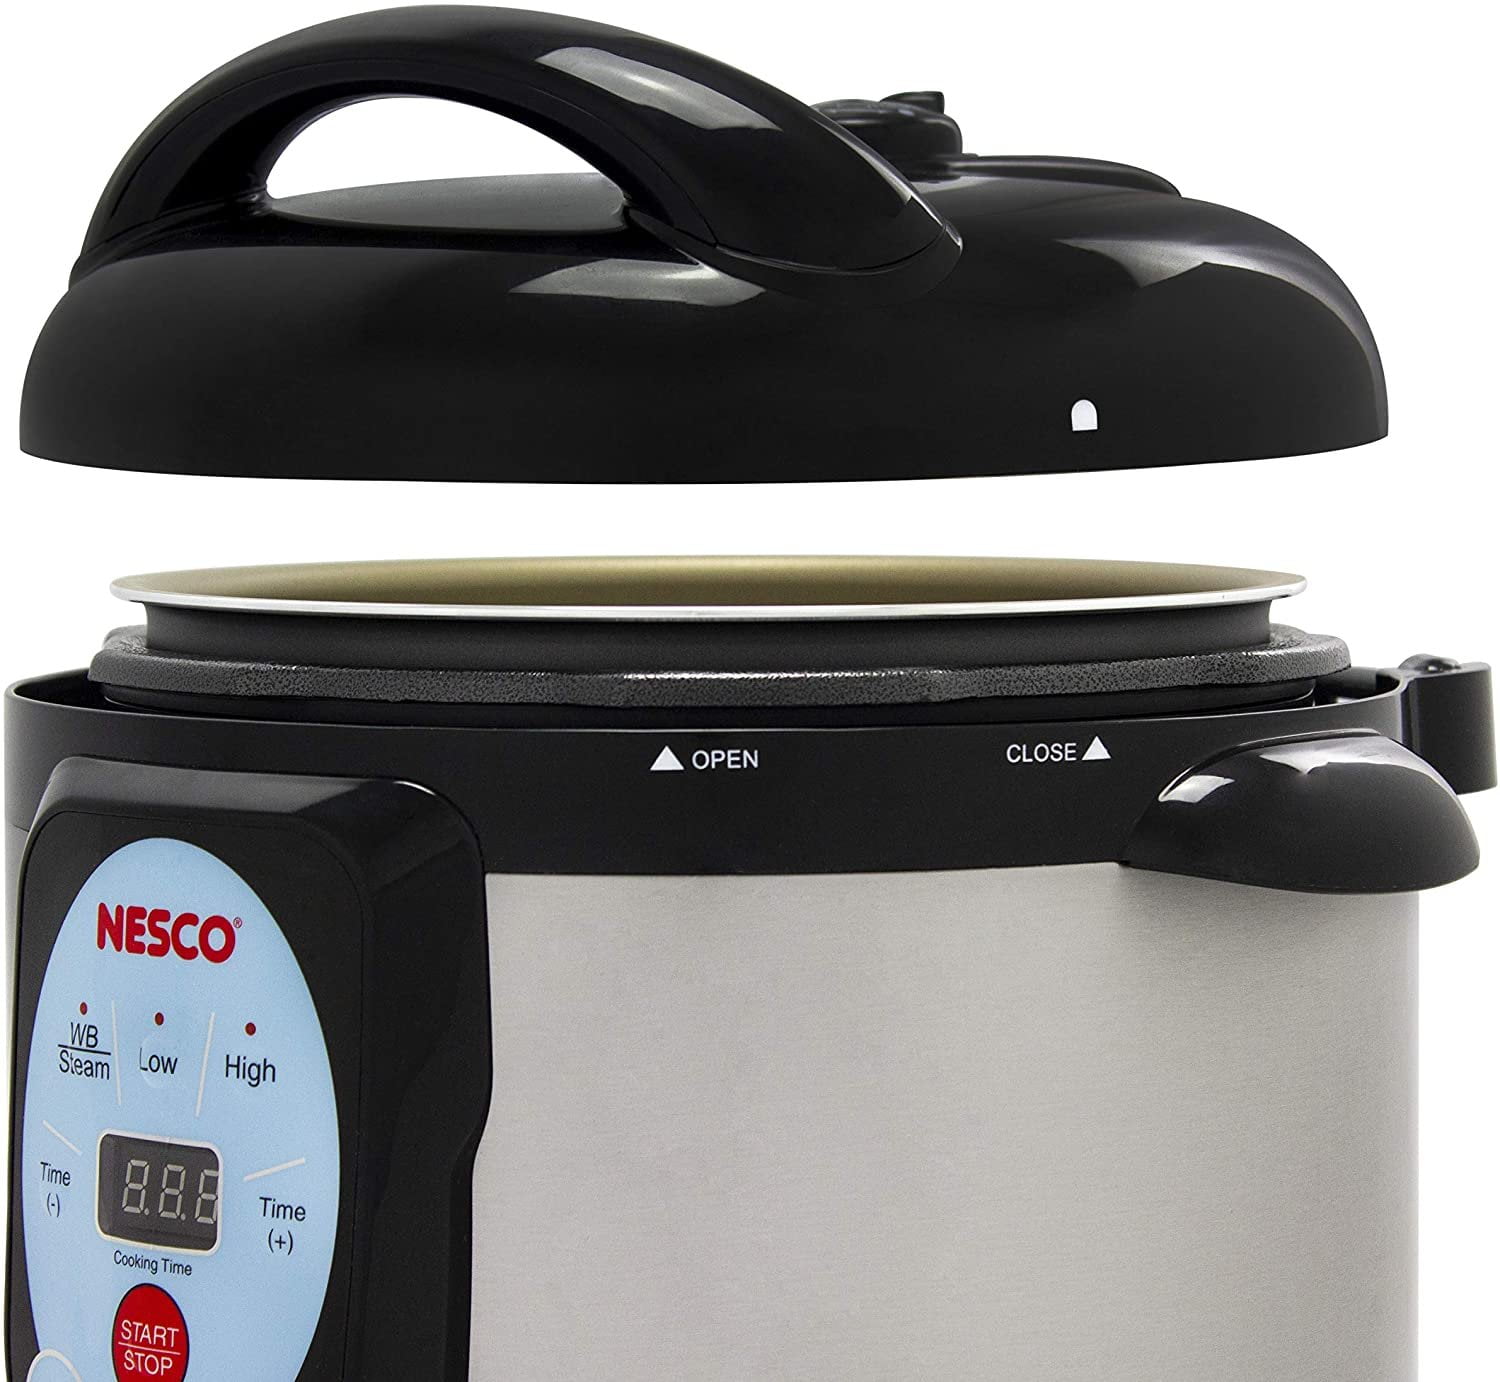 Is the Nesco Smart Canner Safe? - Stocking My Pantry